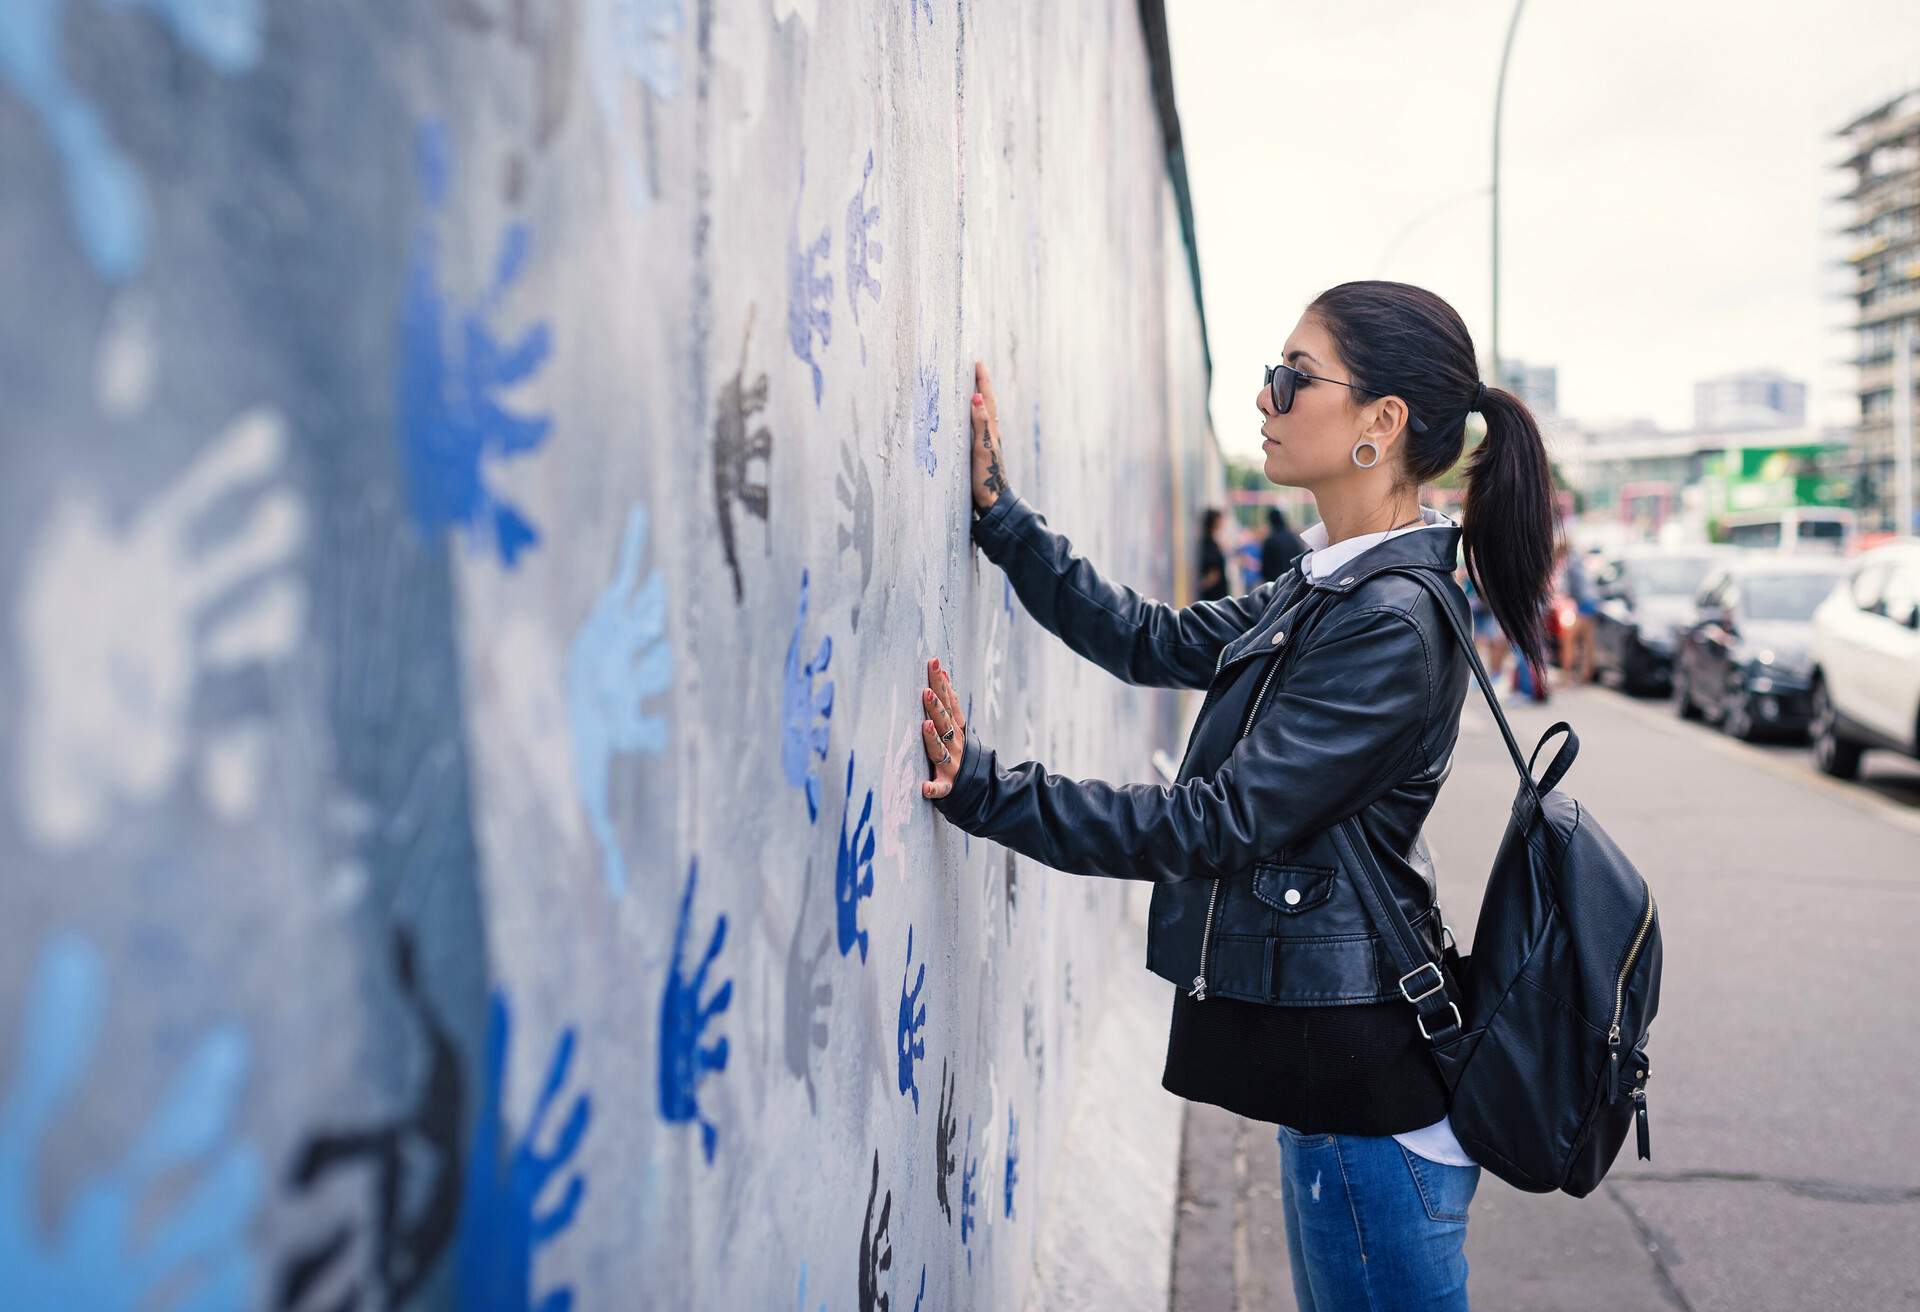 A woman in a black leather jacket stands in front of a wall decorated with colourful handprints and touches the wall with her hand.